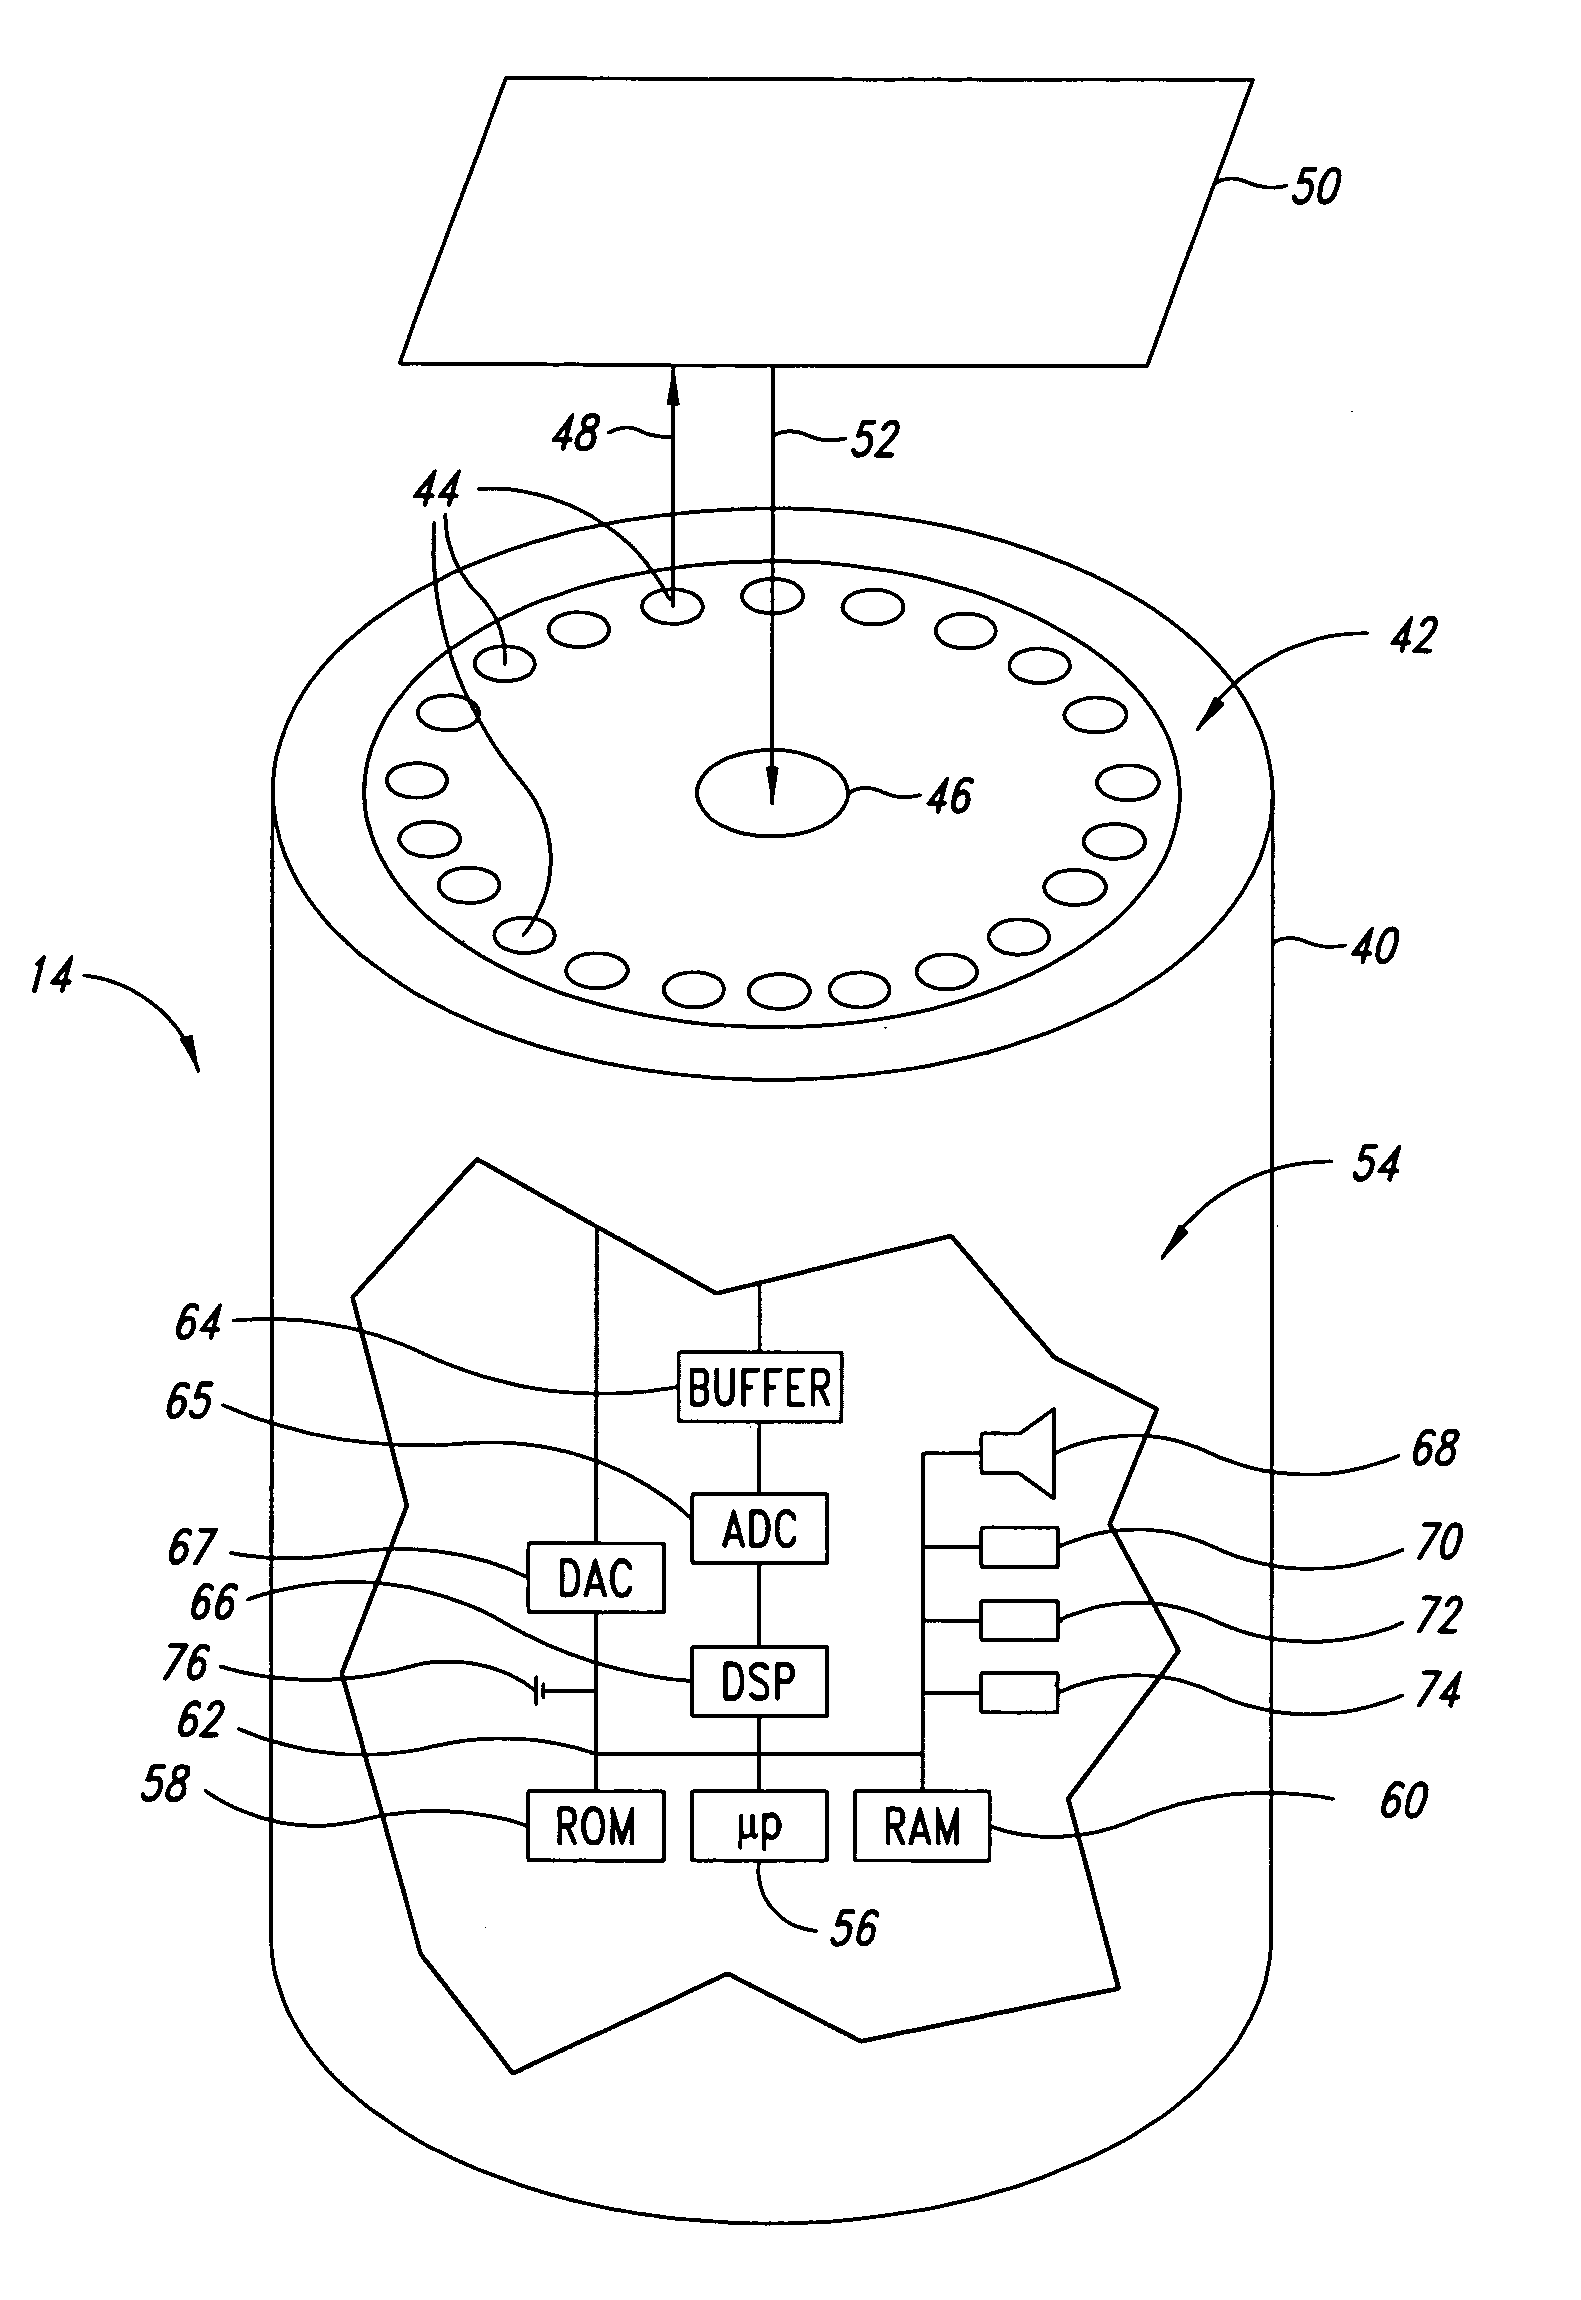 Method, apparatus, and article to facilitate evaluation of objects using electromagnetic energy